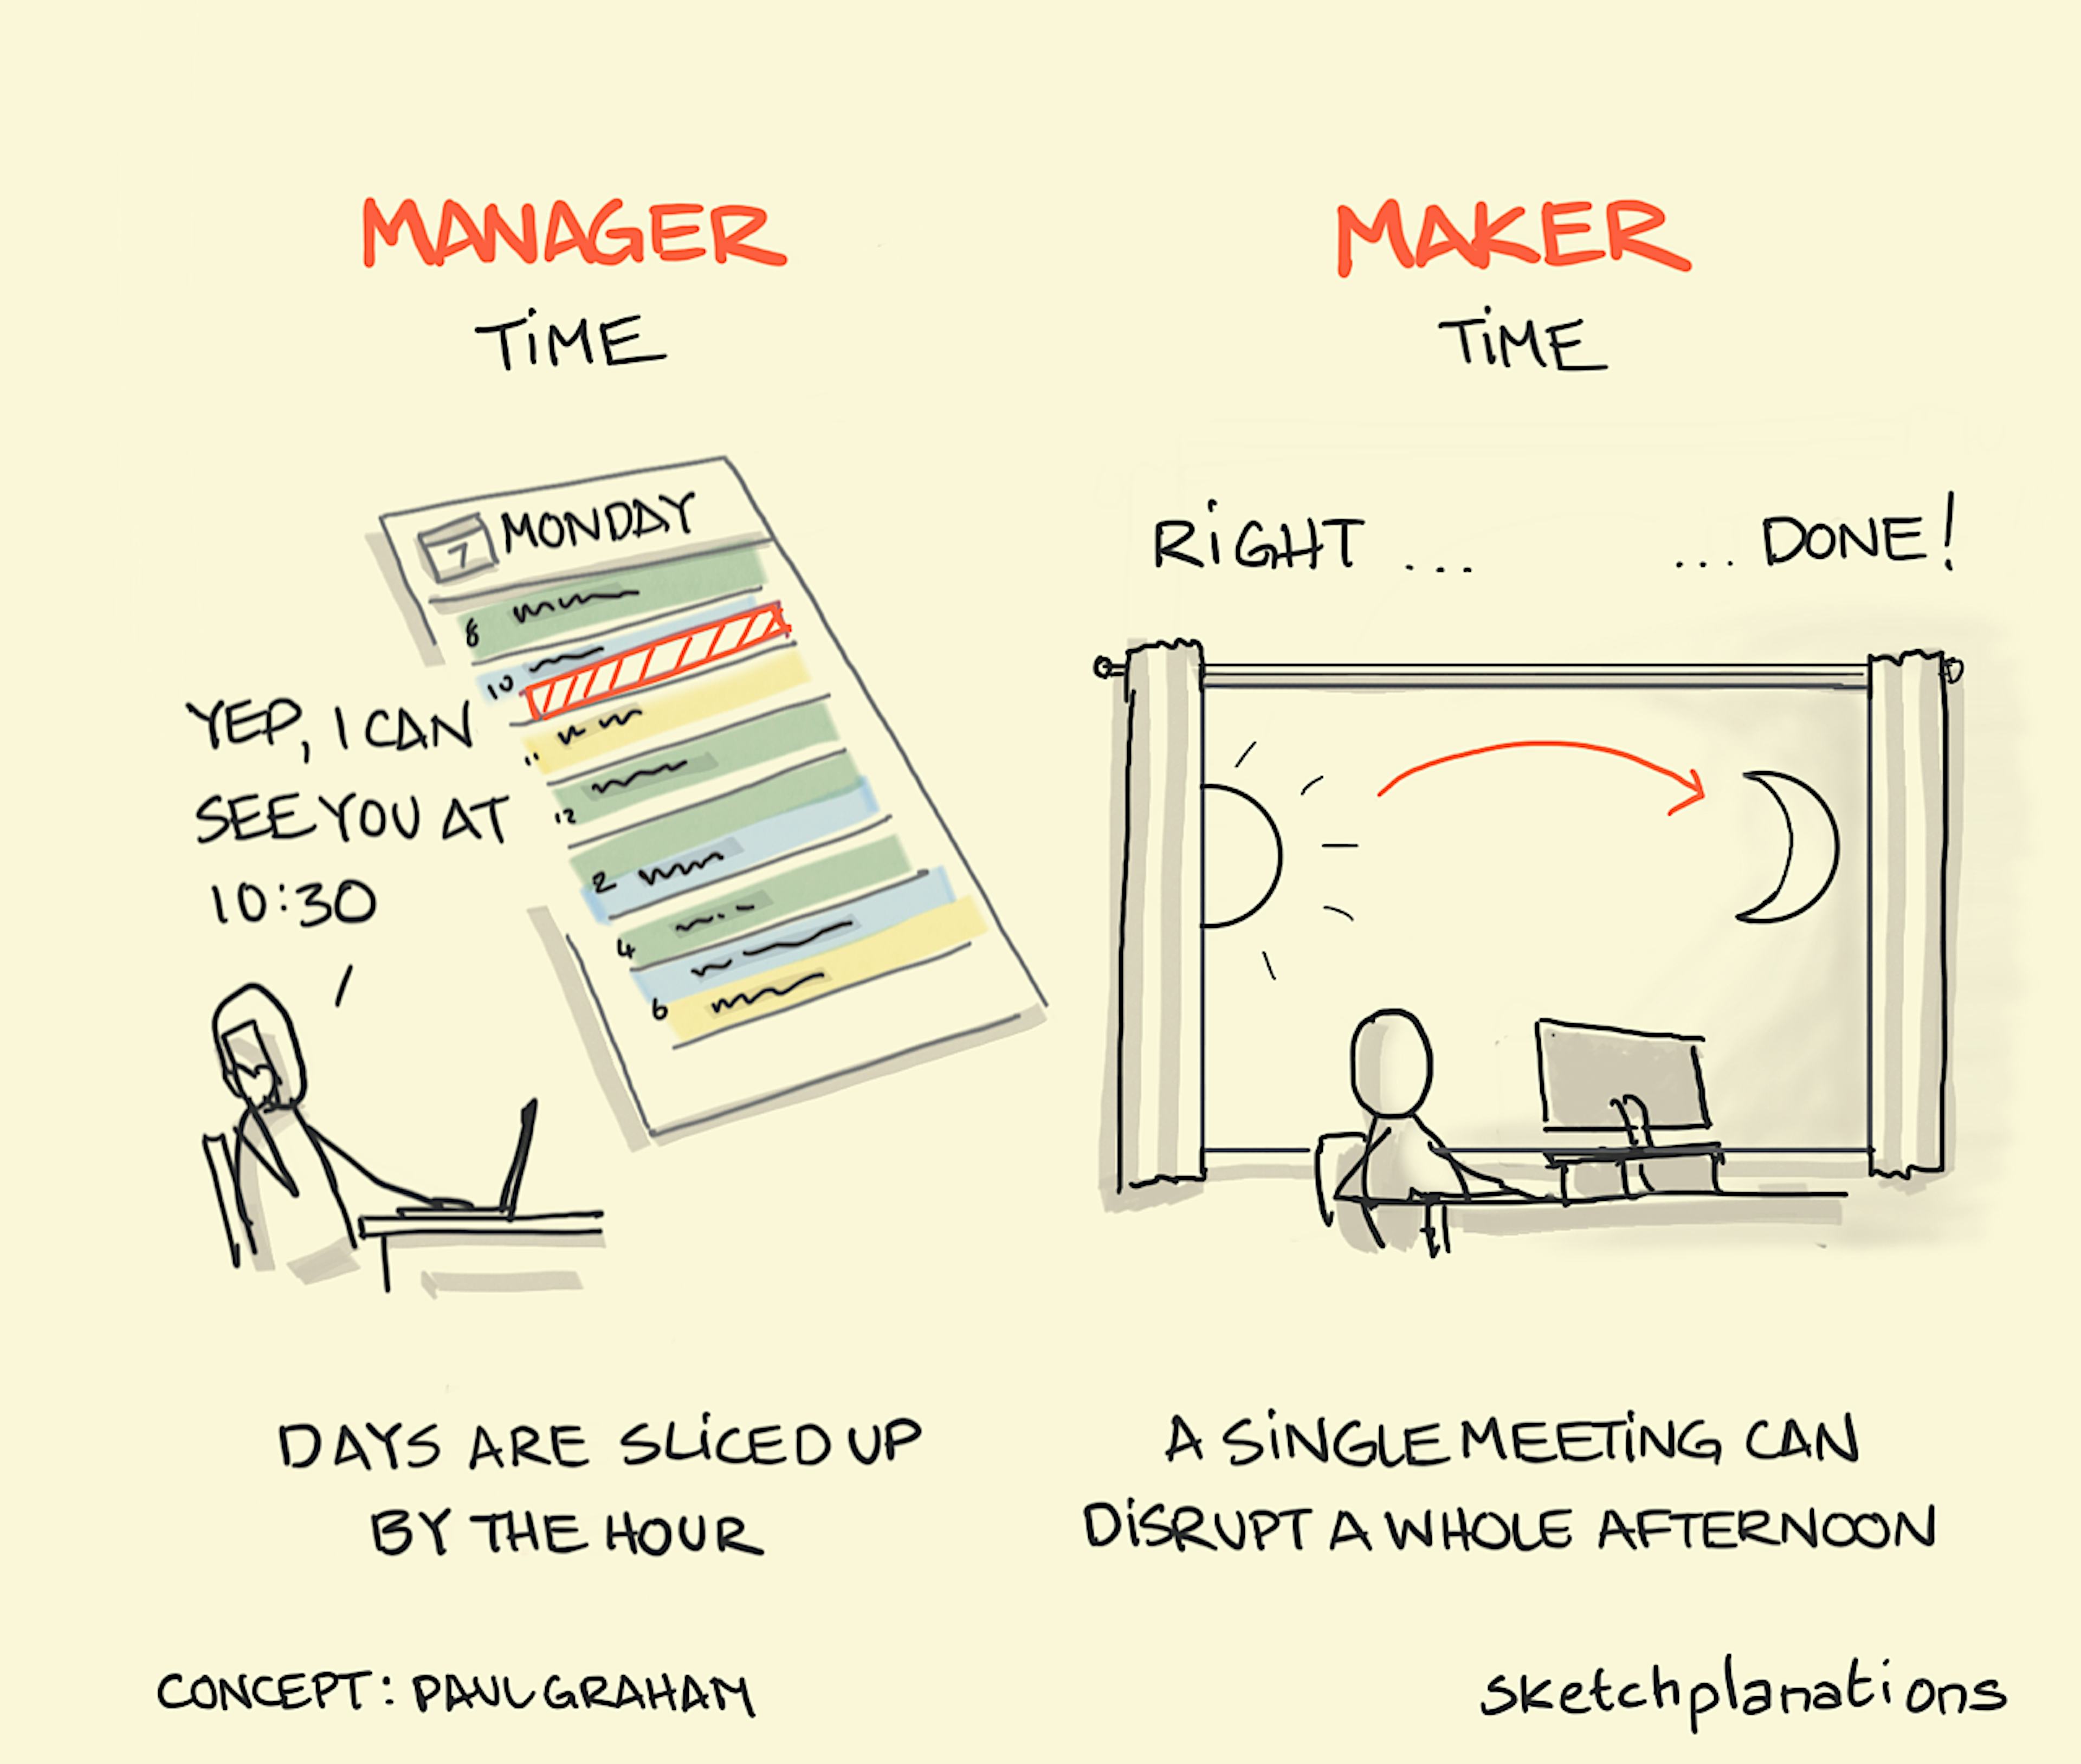 Manager Time; Maker Time illustration: On the left, Manager Time shows someone in their office at their laptop, scheduling in meetings and calls throughout the day, neatly managing time with hourly and half-hourly slots in their calendar. On the right, Maker Time ideally does away with any scheduled meetings or calls to allow for an open day for our worker at their desk to grind through a complex problem or new project. The passing of time is only marked by day turning to night.  